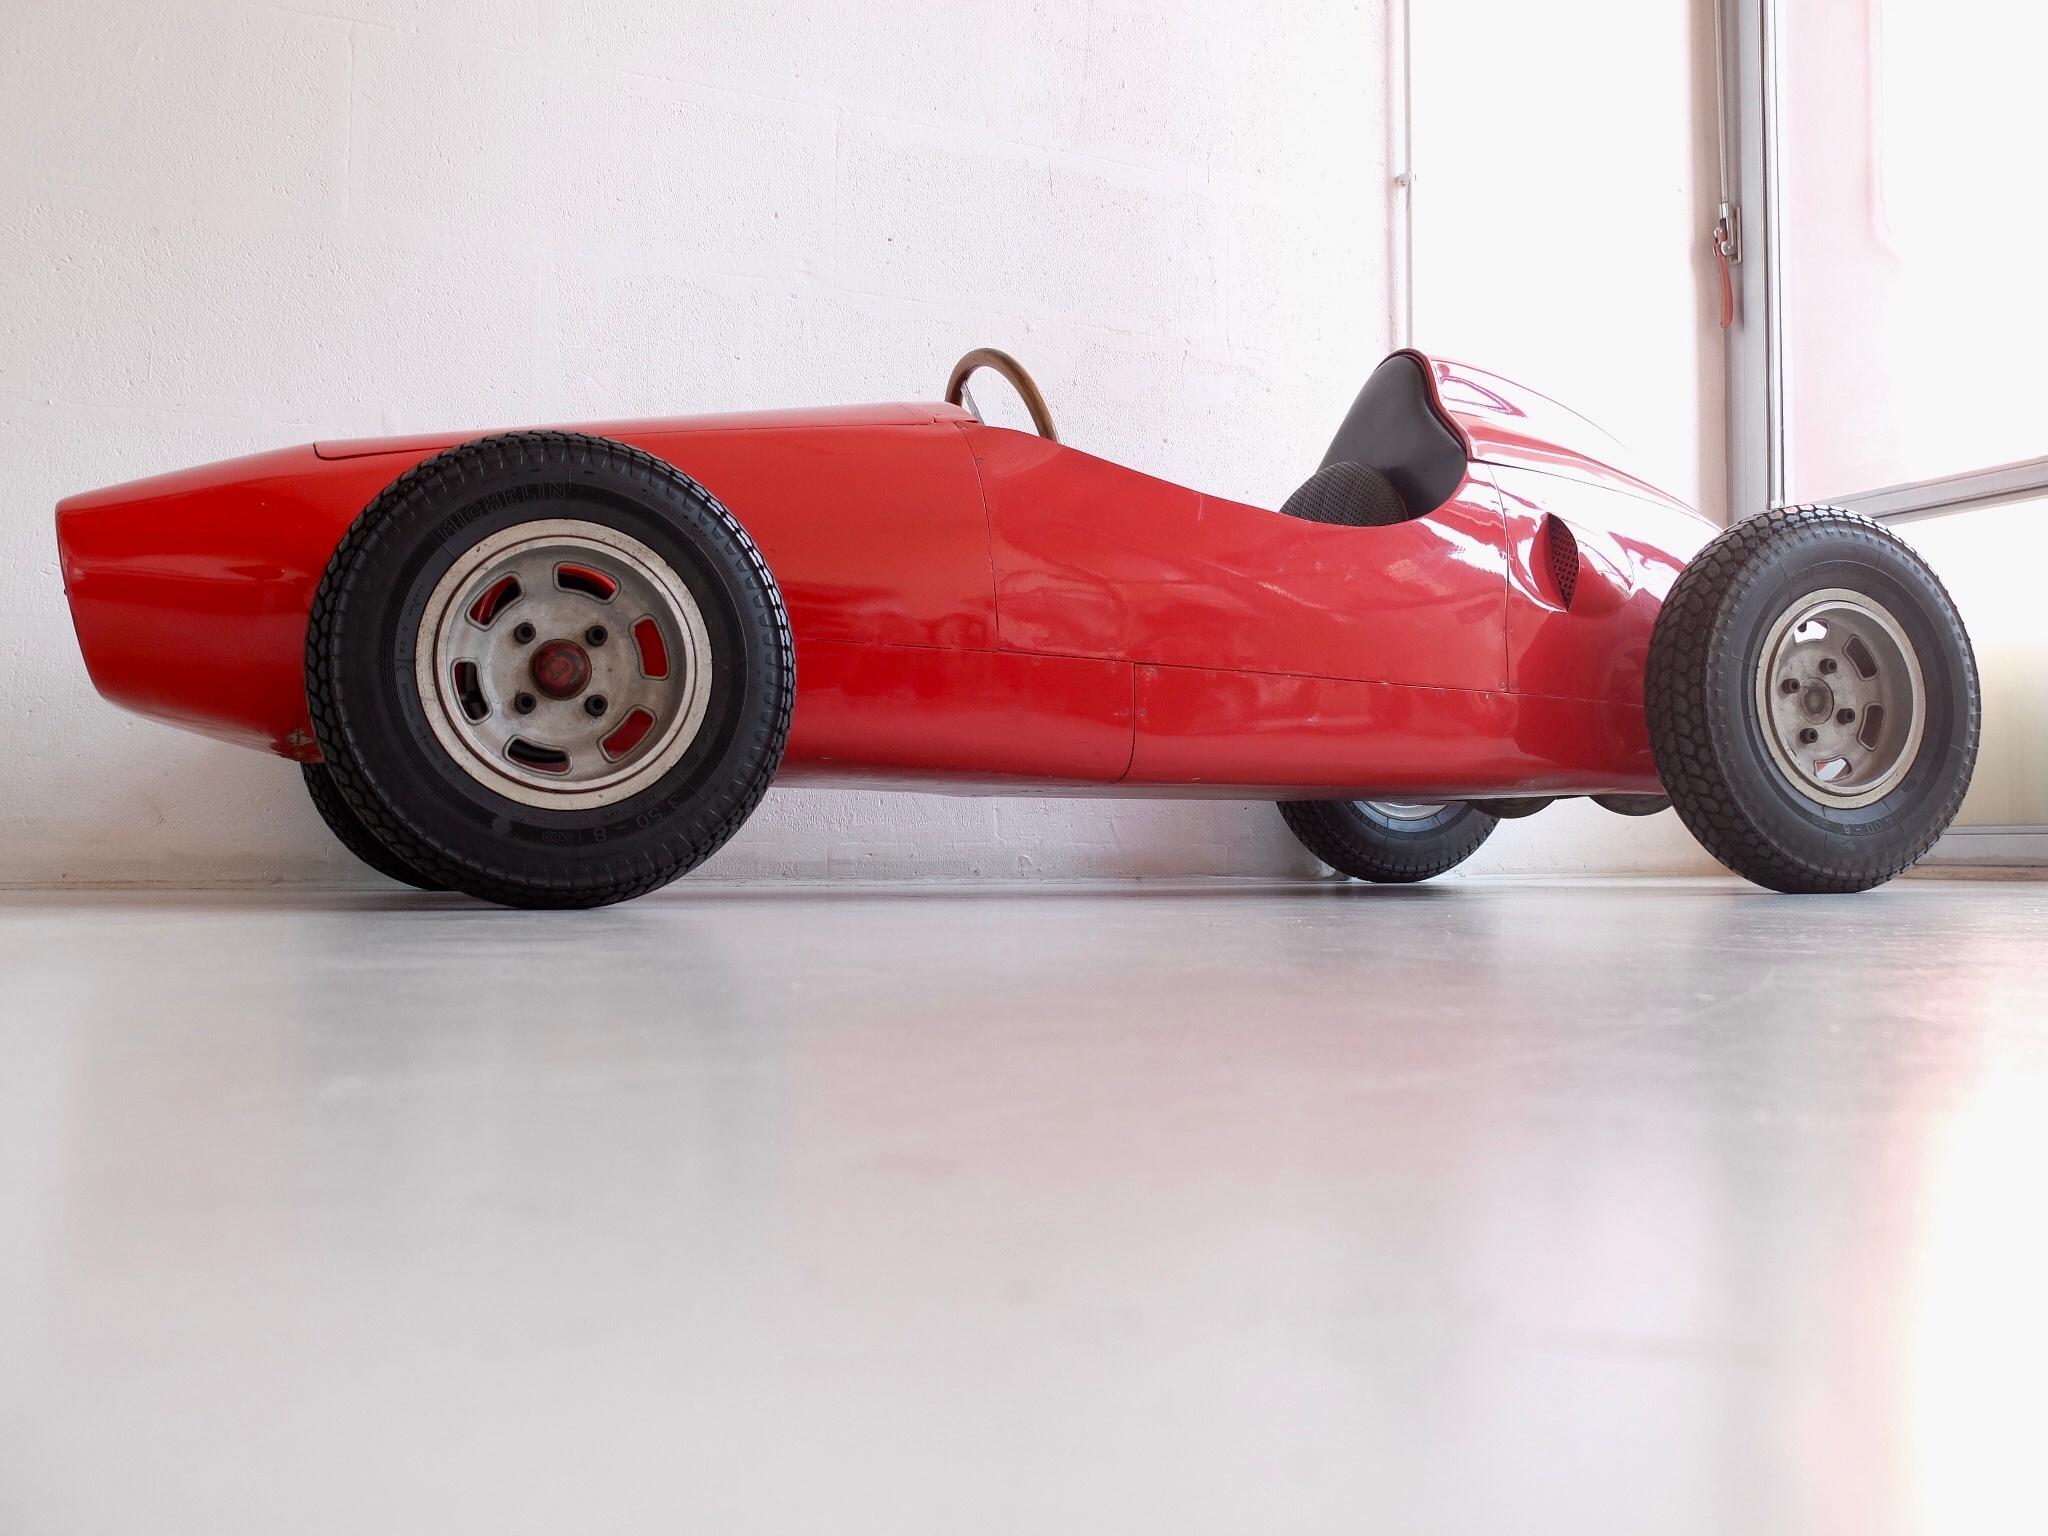 “Ferrari 500 F2” prototype, children's car, 1: 2 scale, petrol fueled, hydraulic brake system, 1950s
The car comes from the Pillon family of Treviso-Italy.
The prototype strongly wanted by Cav. Luigino Pillon president of the Ferrari Club of